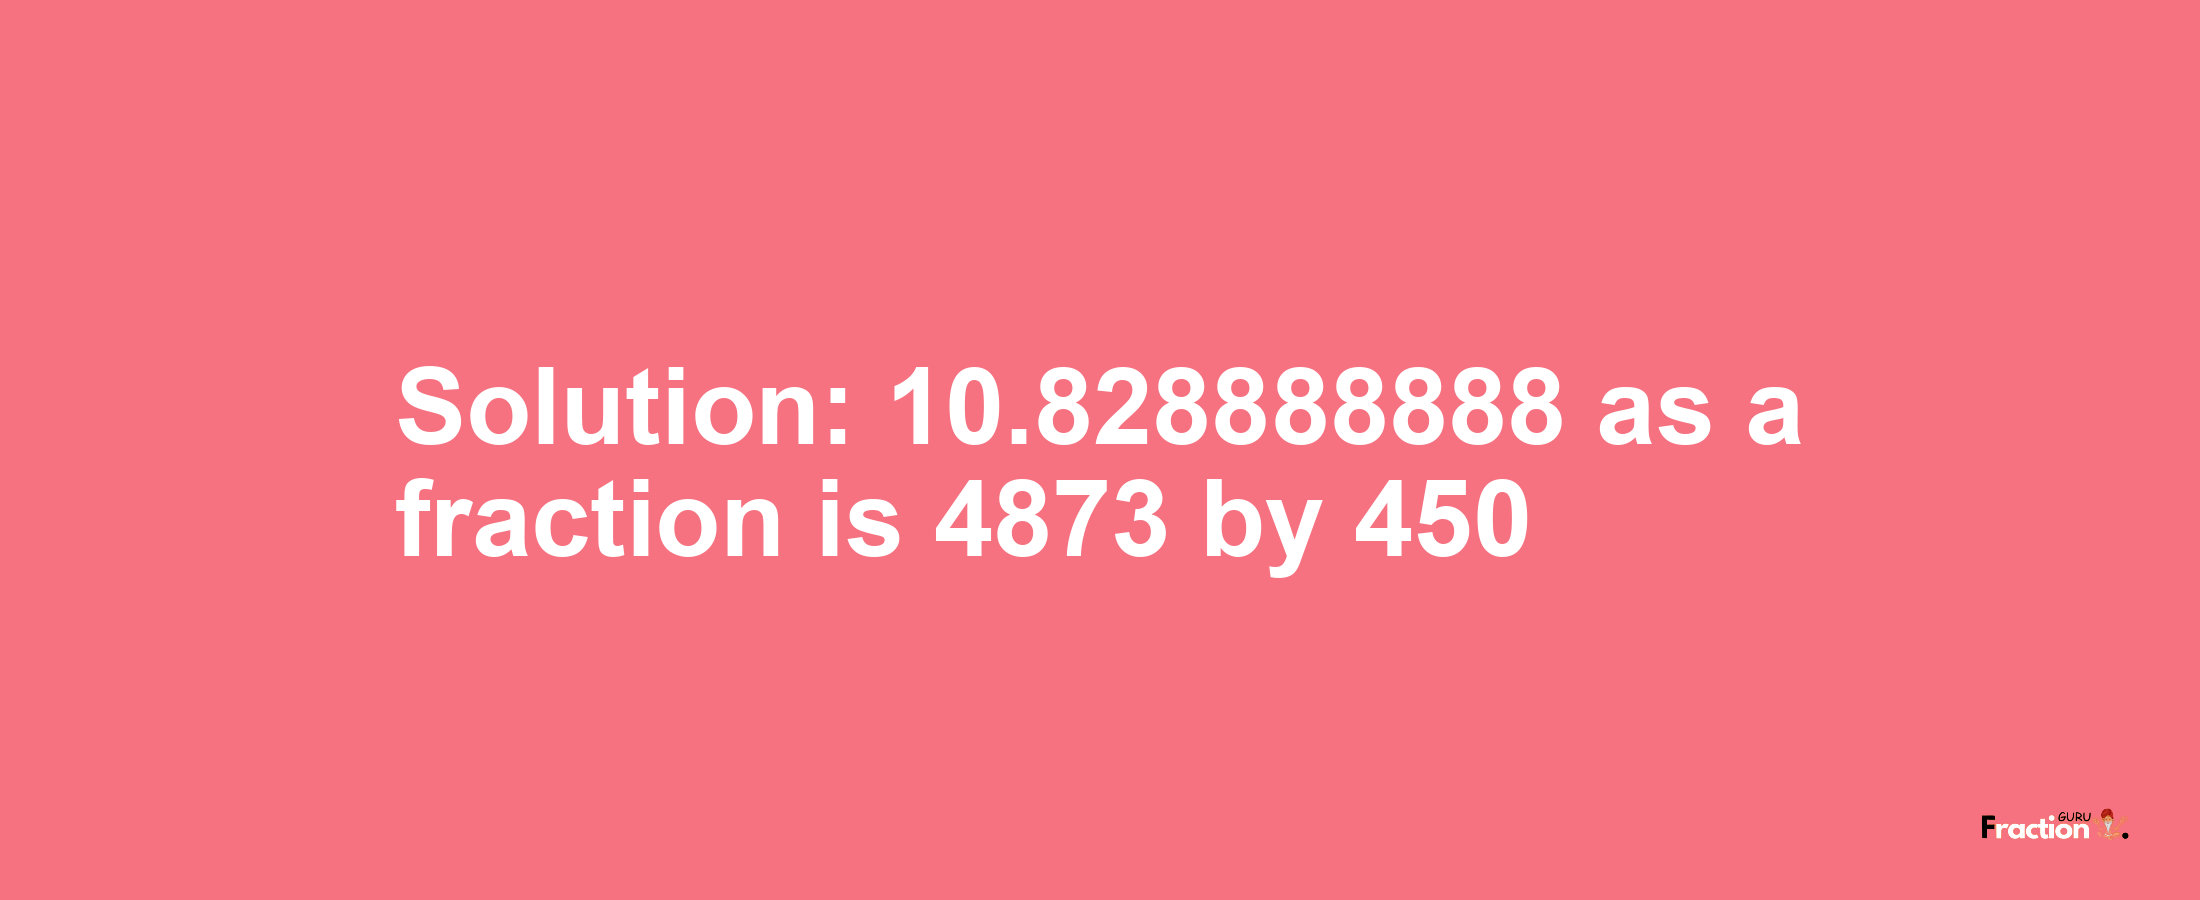 Solution:10.828888888 as a fraction is 4873/450